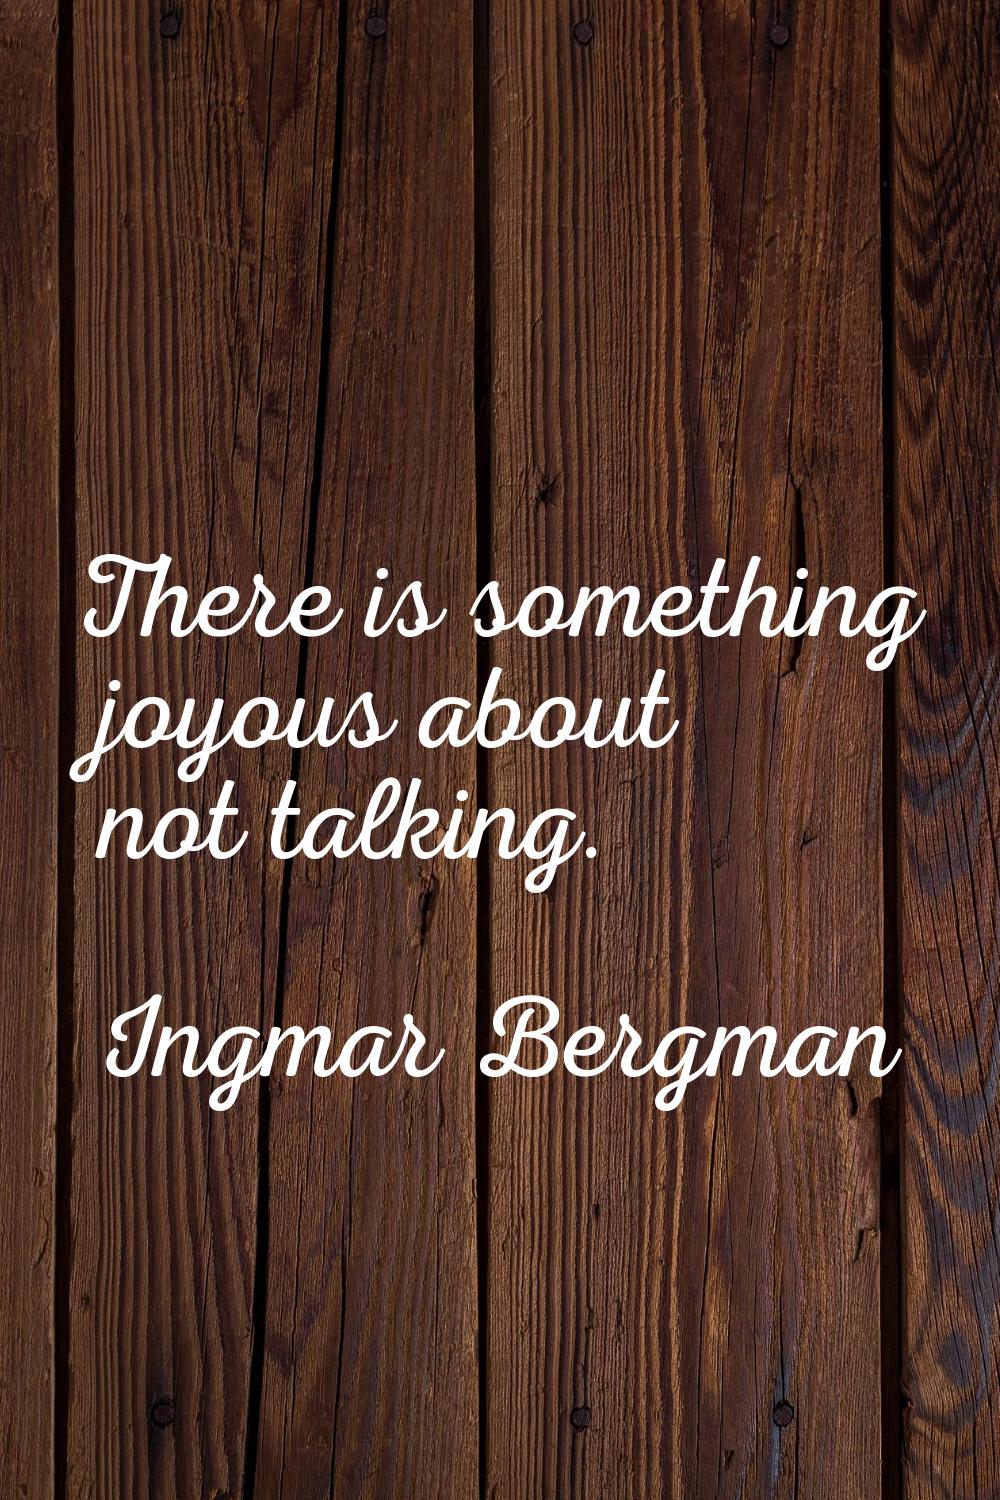 There is something joyous about not talking.